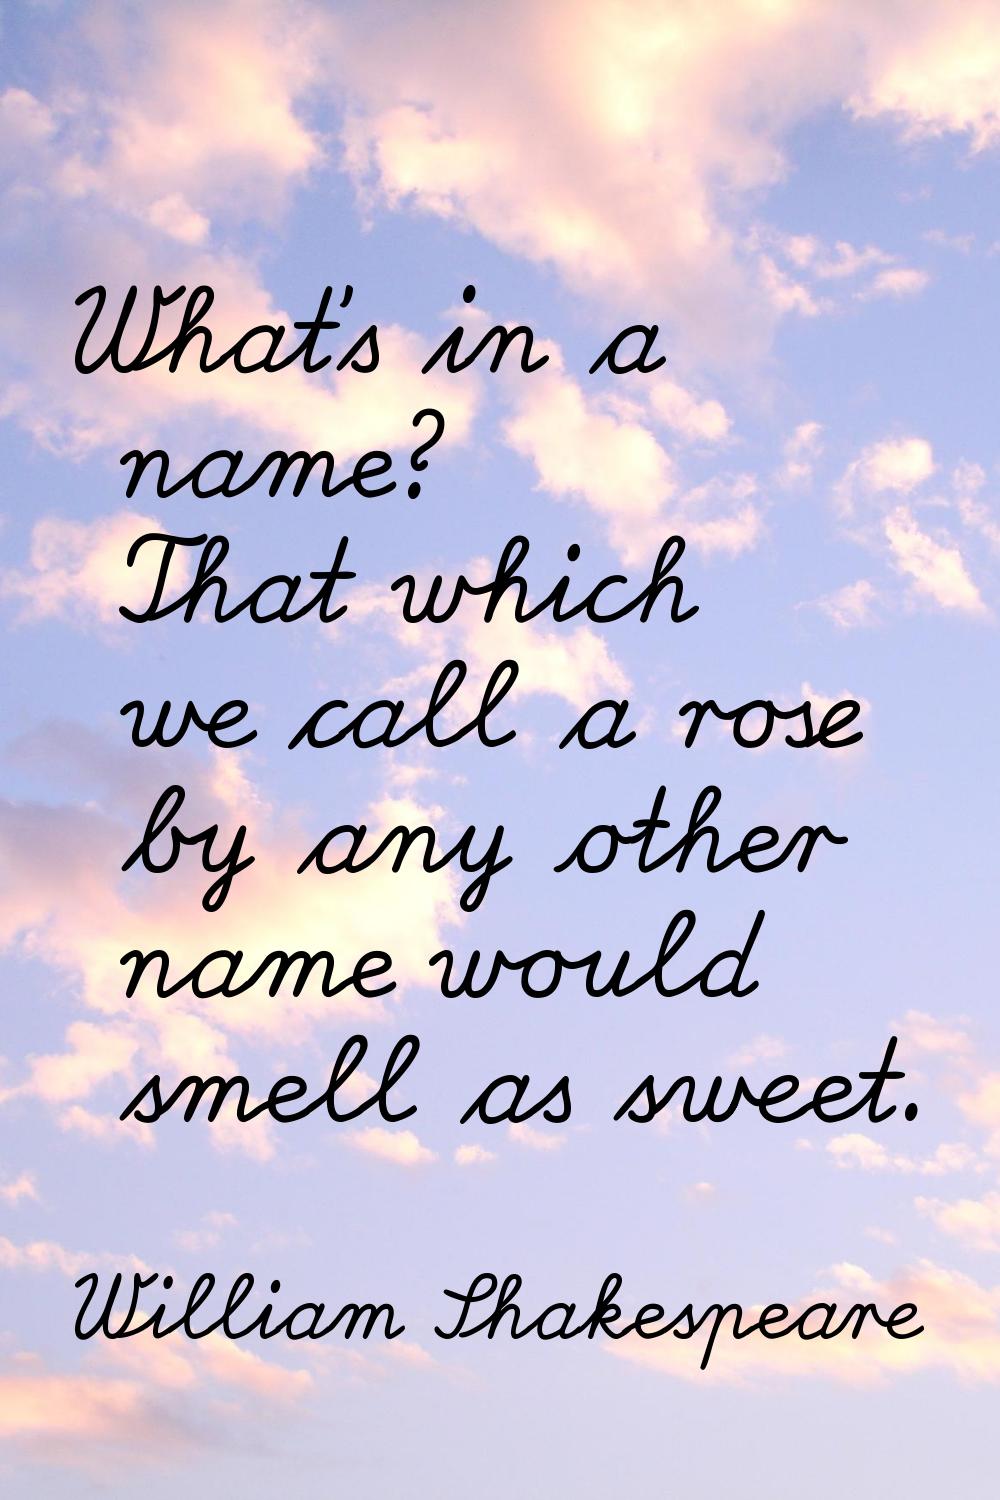 What's in a name? That which we call a rose by any other name would smell as sweet.